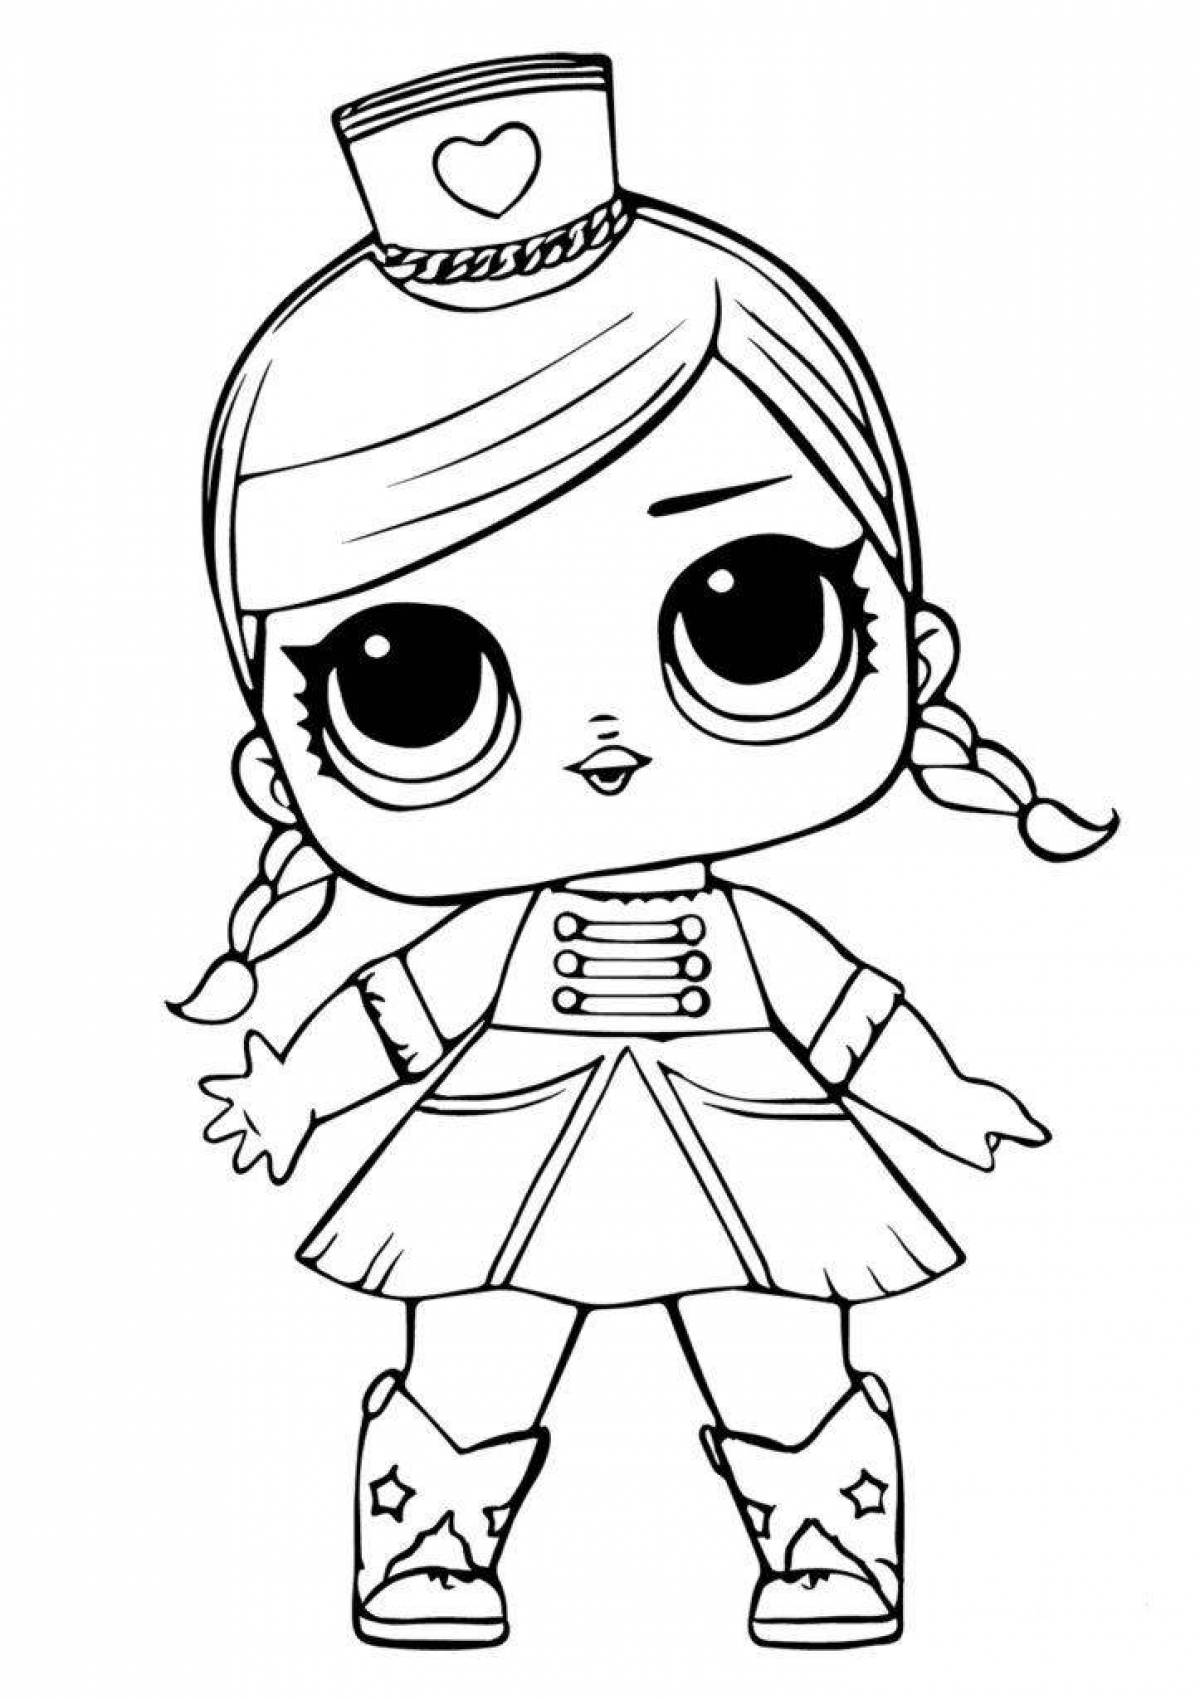 Charming print lol doll coloring page